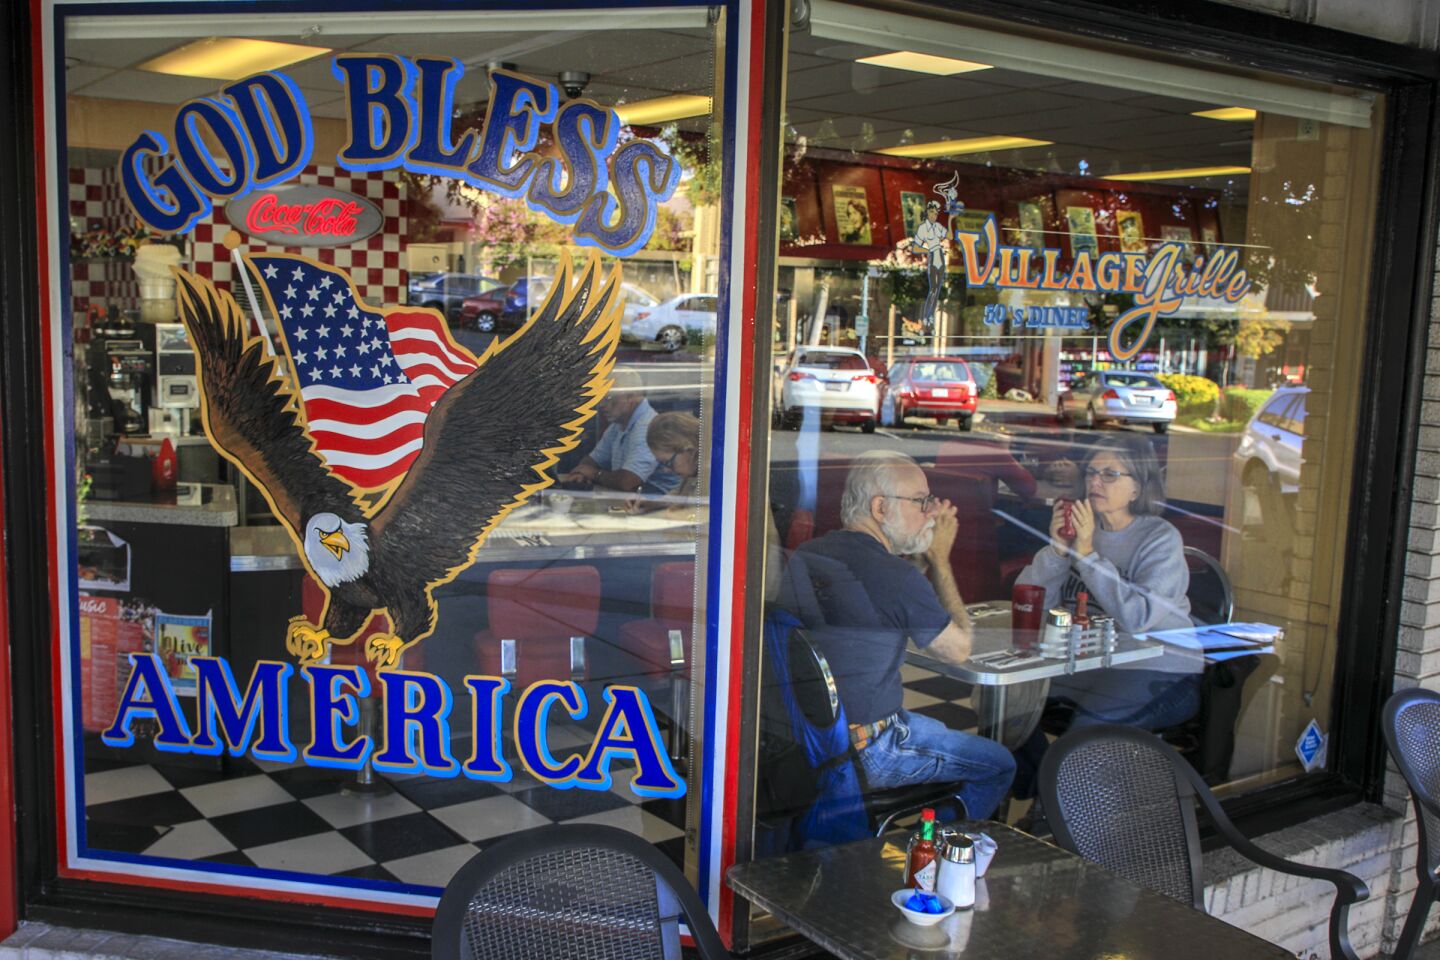 A very patriotic message greets the customers at the Village Grill , a '50s diner in Claremont Village.